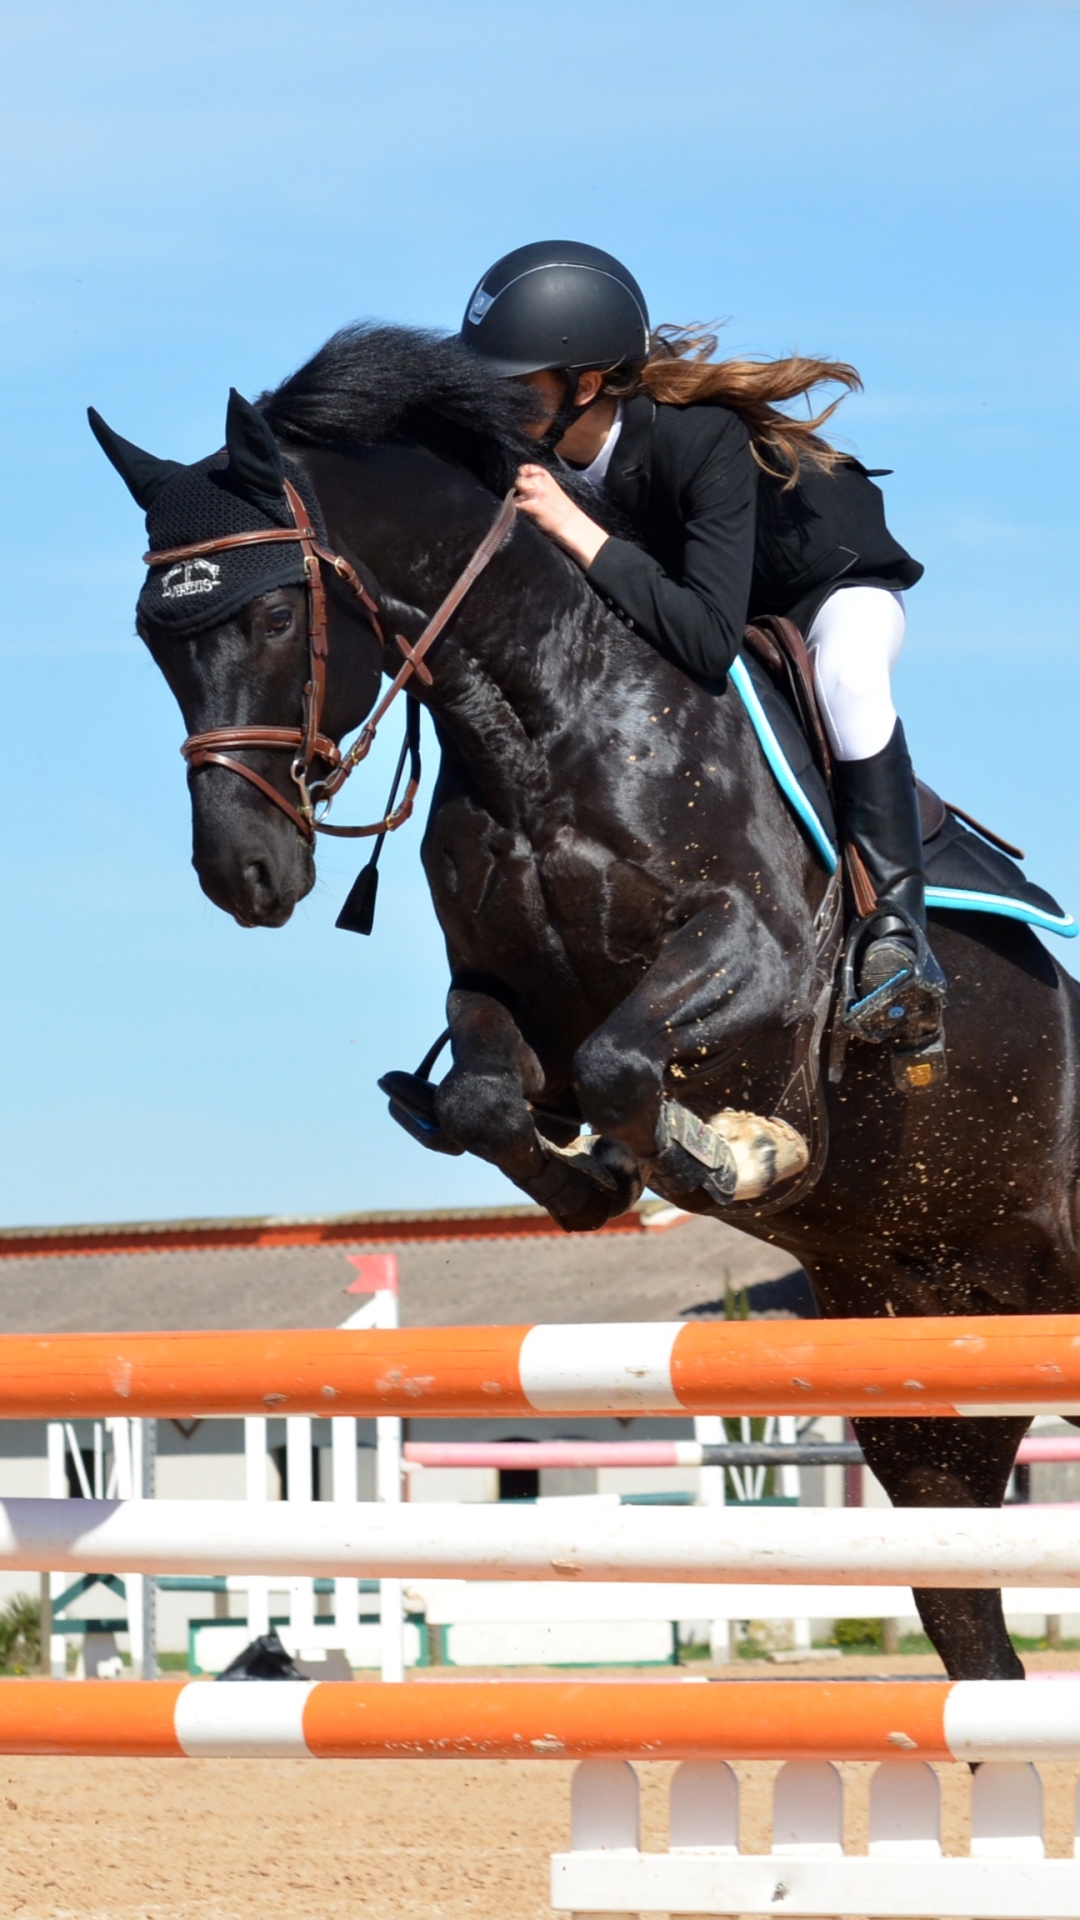 Jumping Over Obstacles At A Show by pixelia